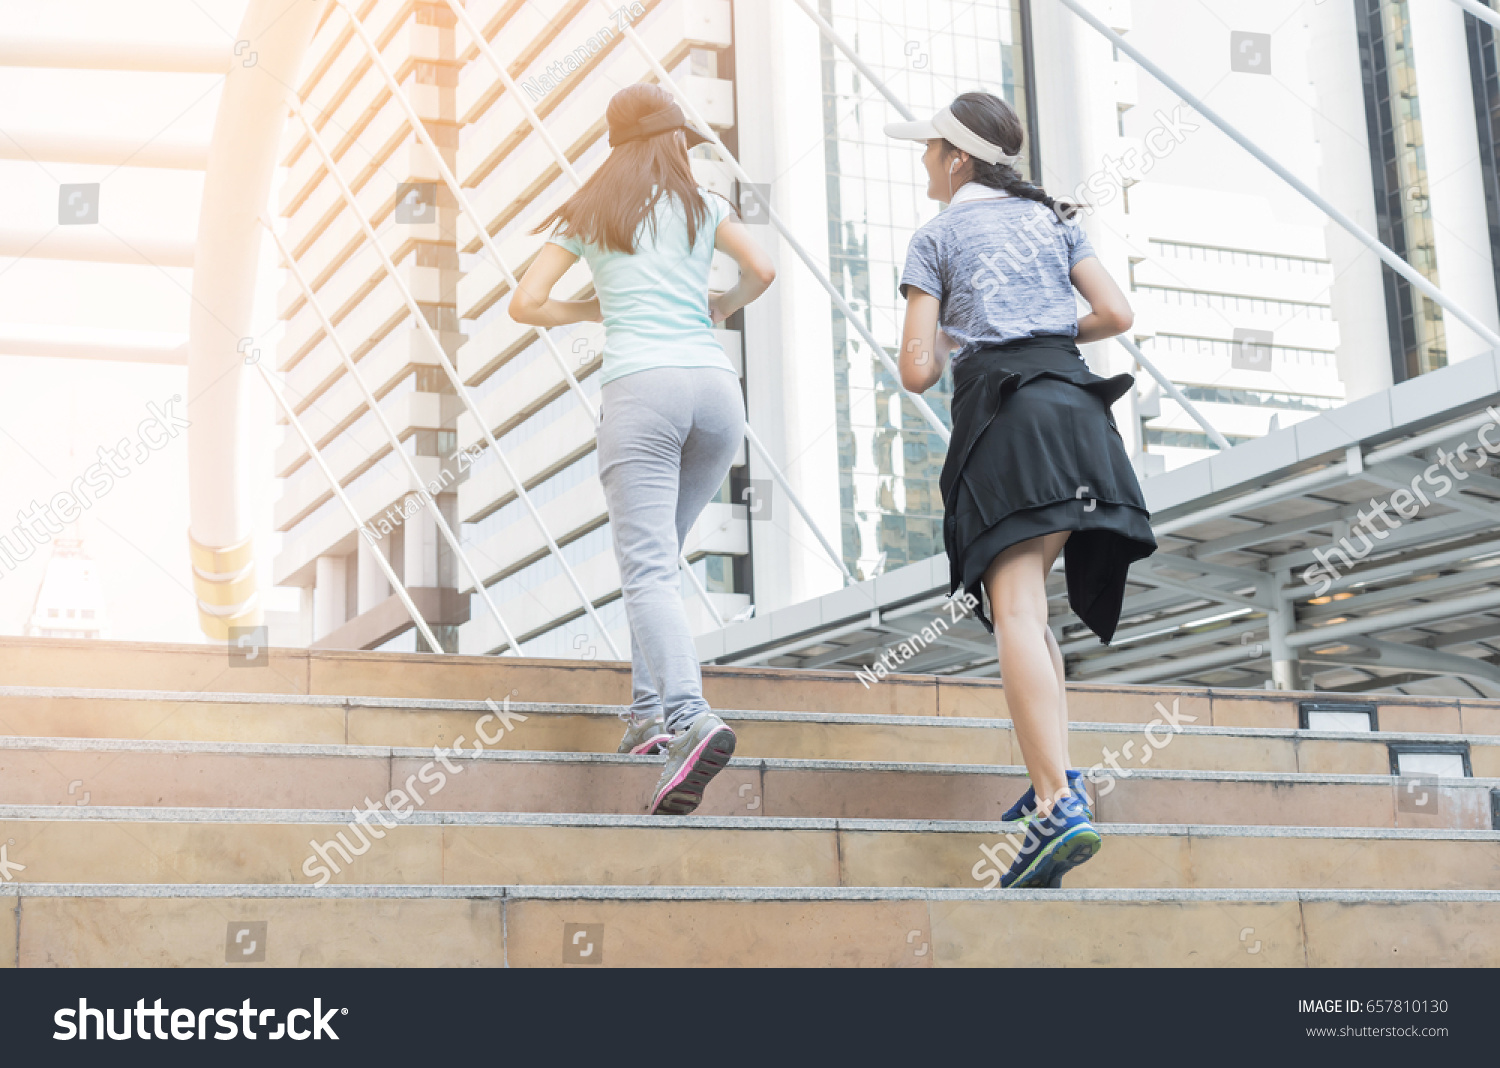 two sports woman running on stair with modern city, healthy lifestyle concept. #657810130